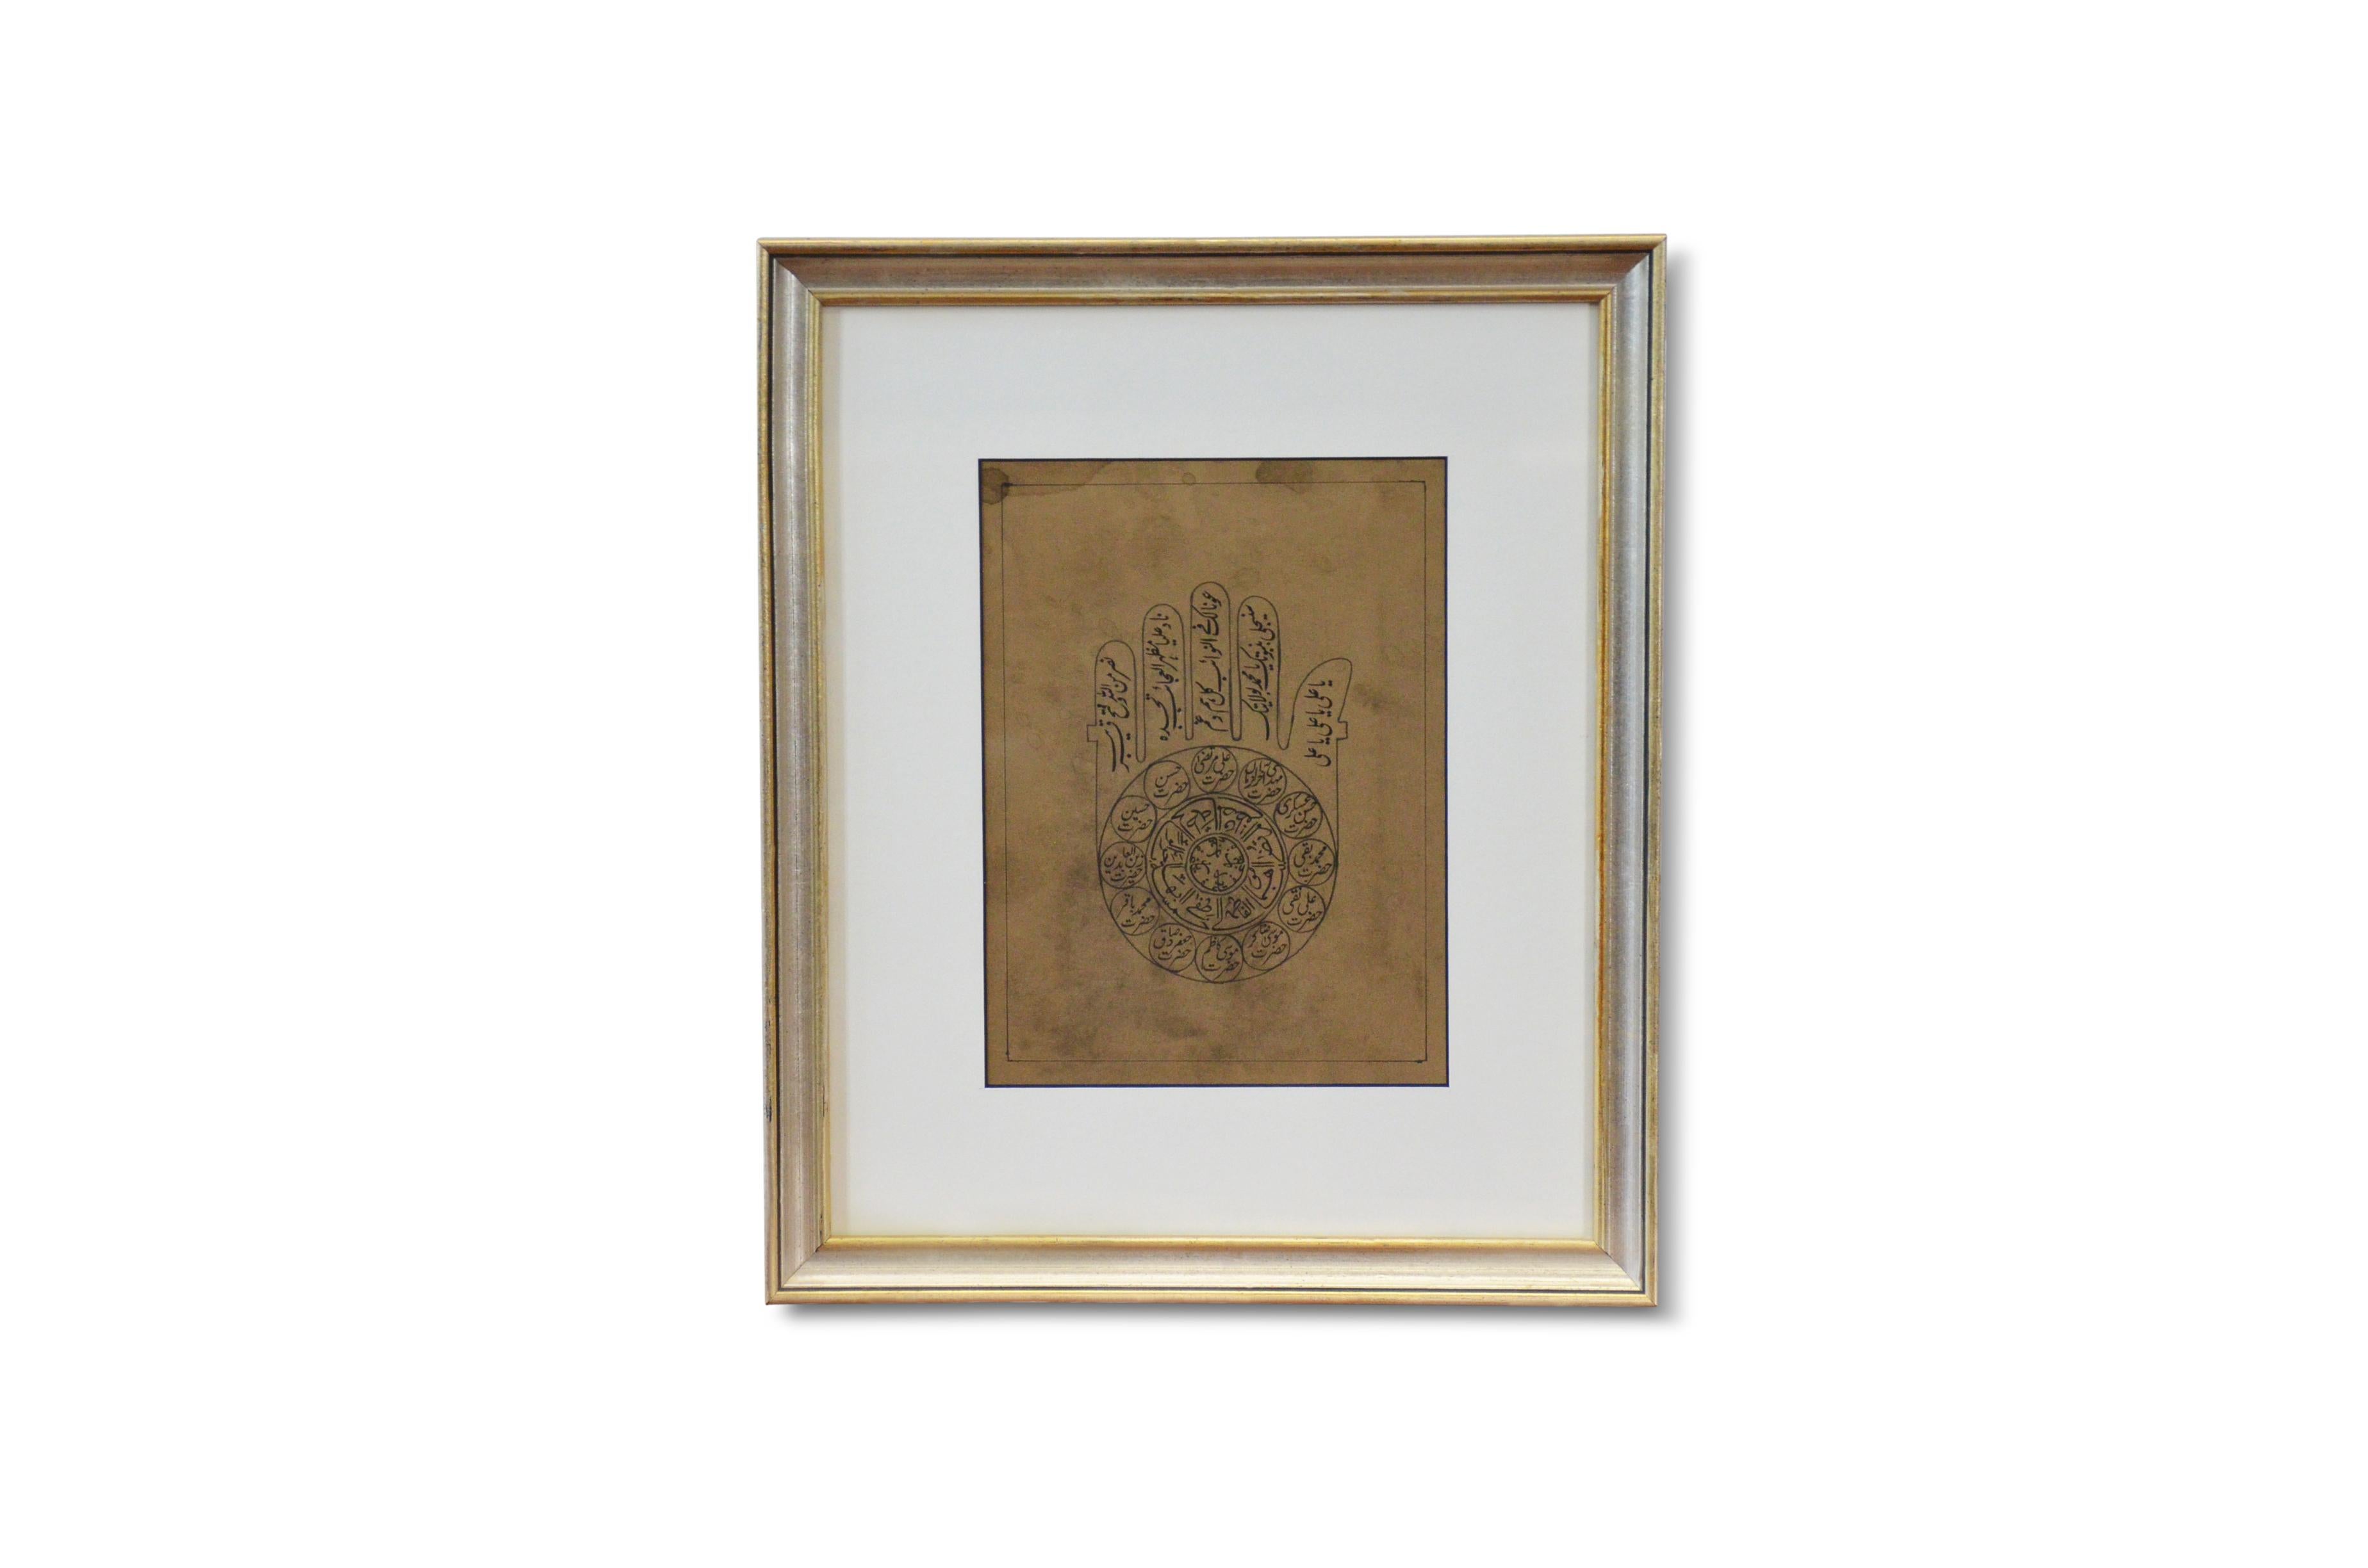 Astrological Hand-Painted on Parchment Print Depicting a Hand with Calligraphy For Sale 1